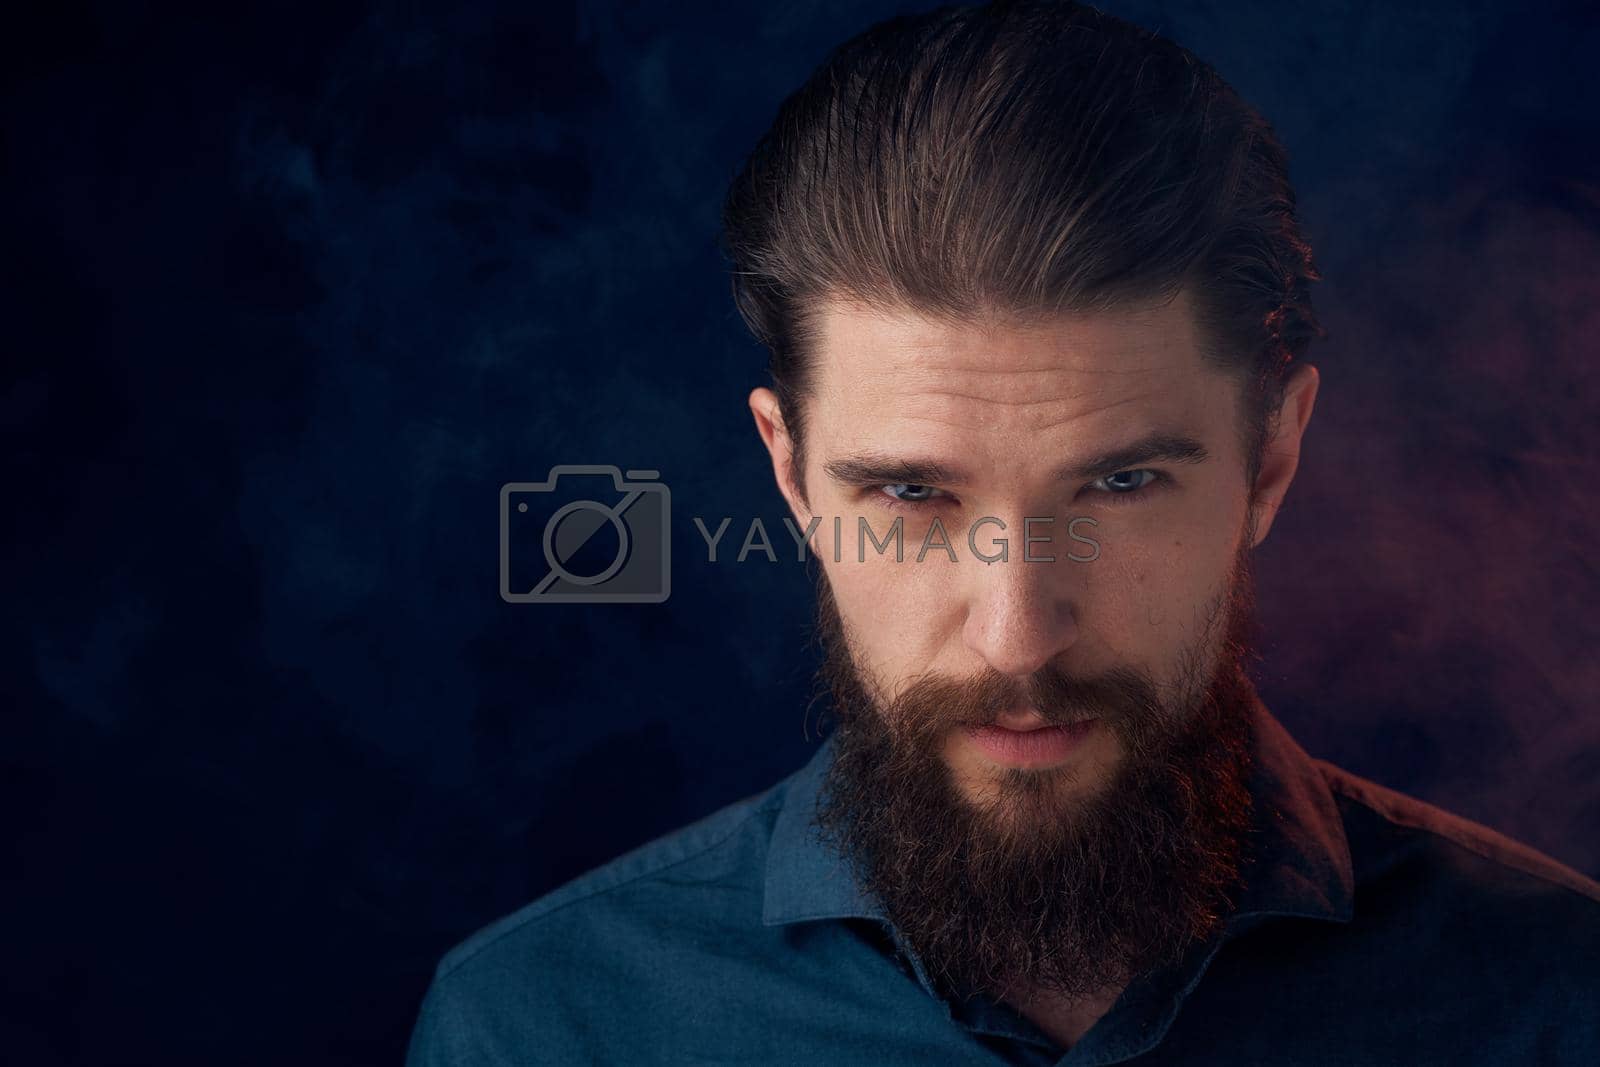 Royalty free image of Cute bearded man in shirt elegant style close-up dark background by SHOTPRIME